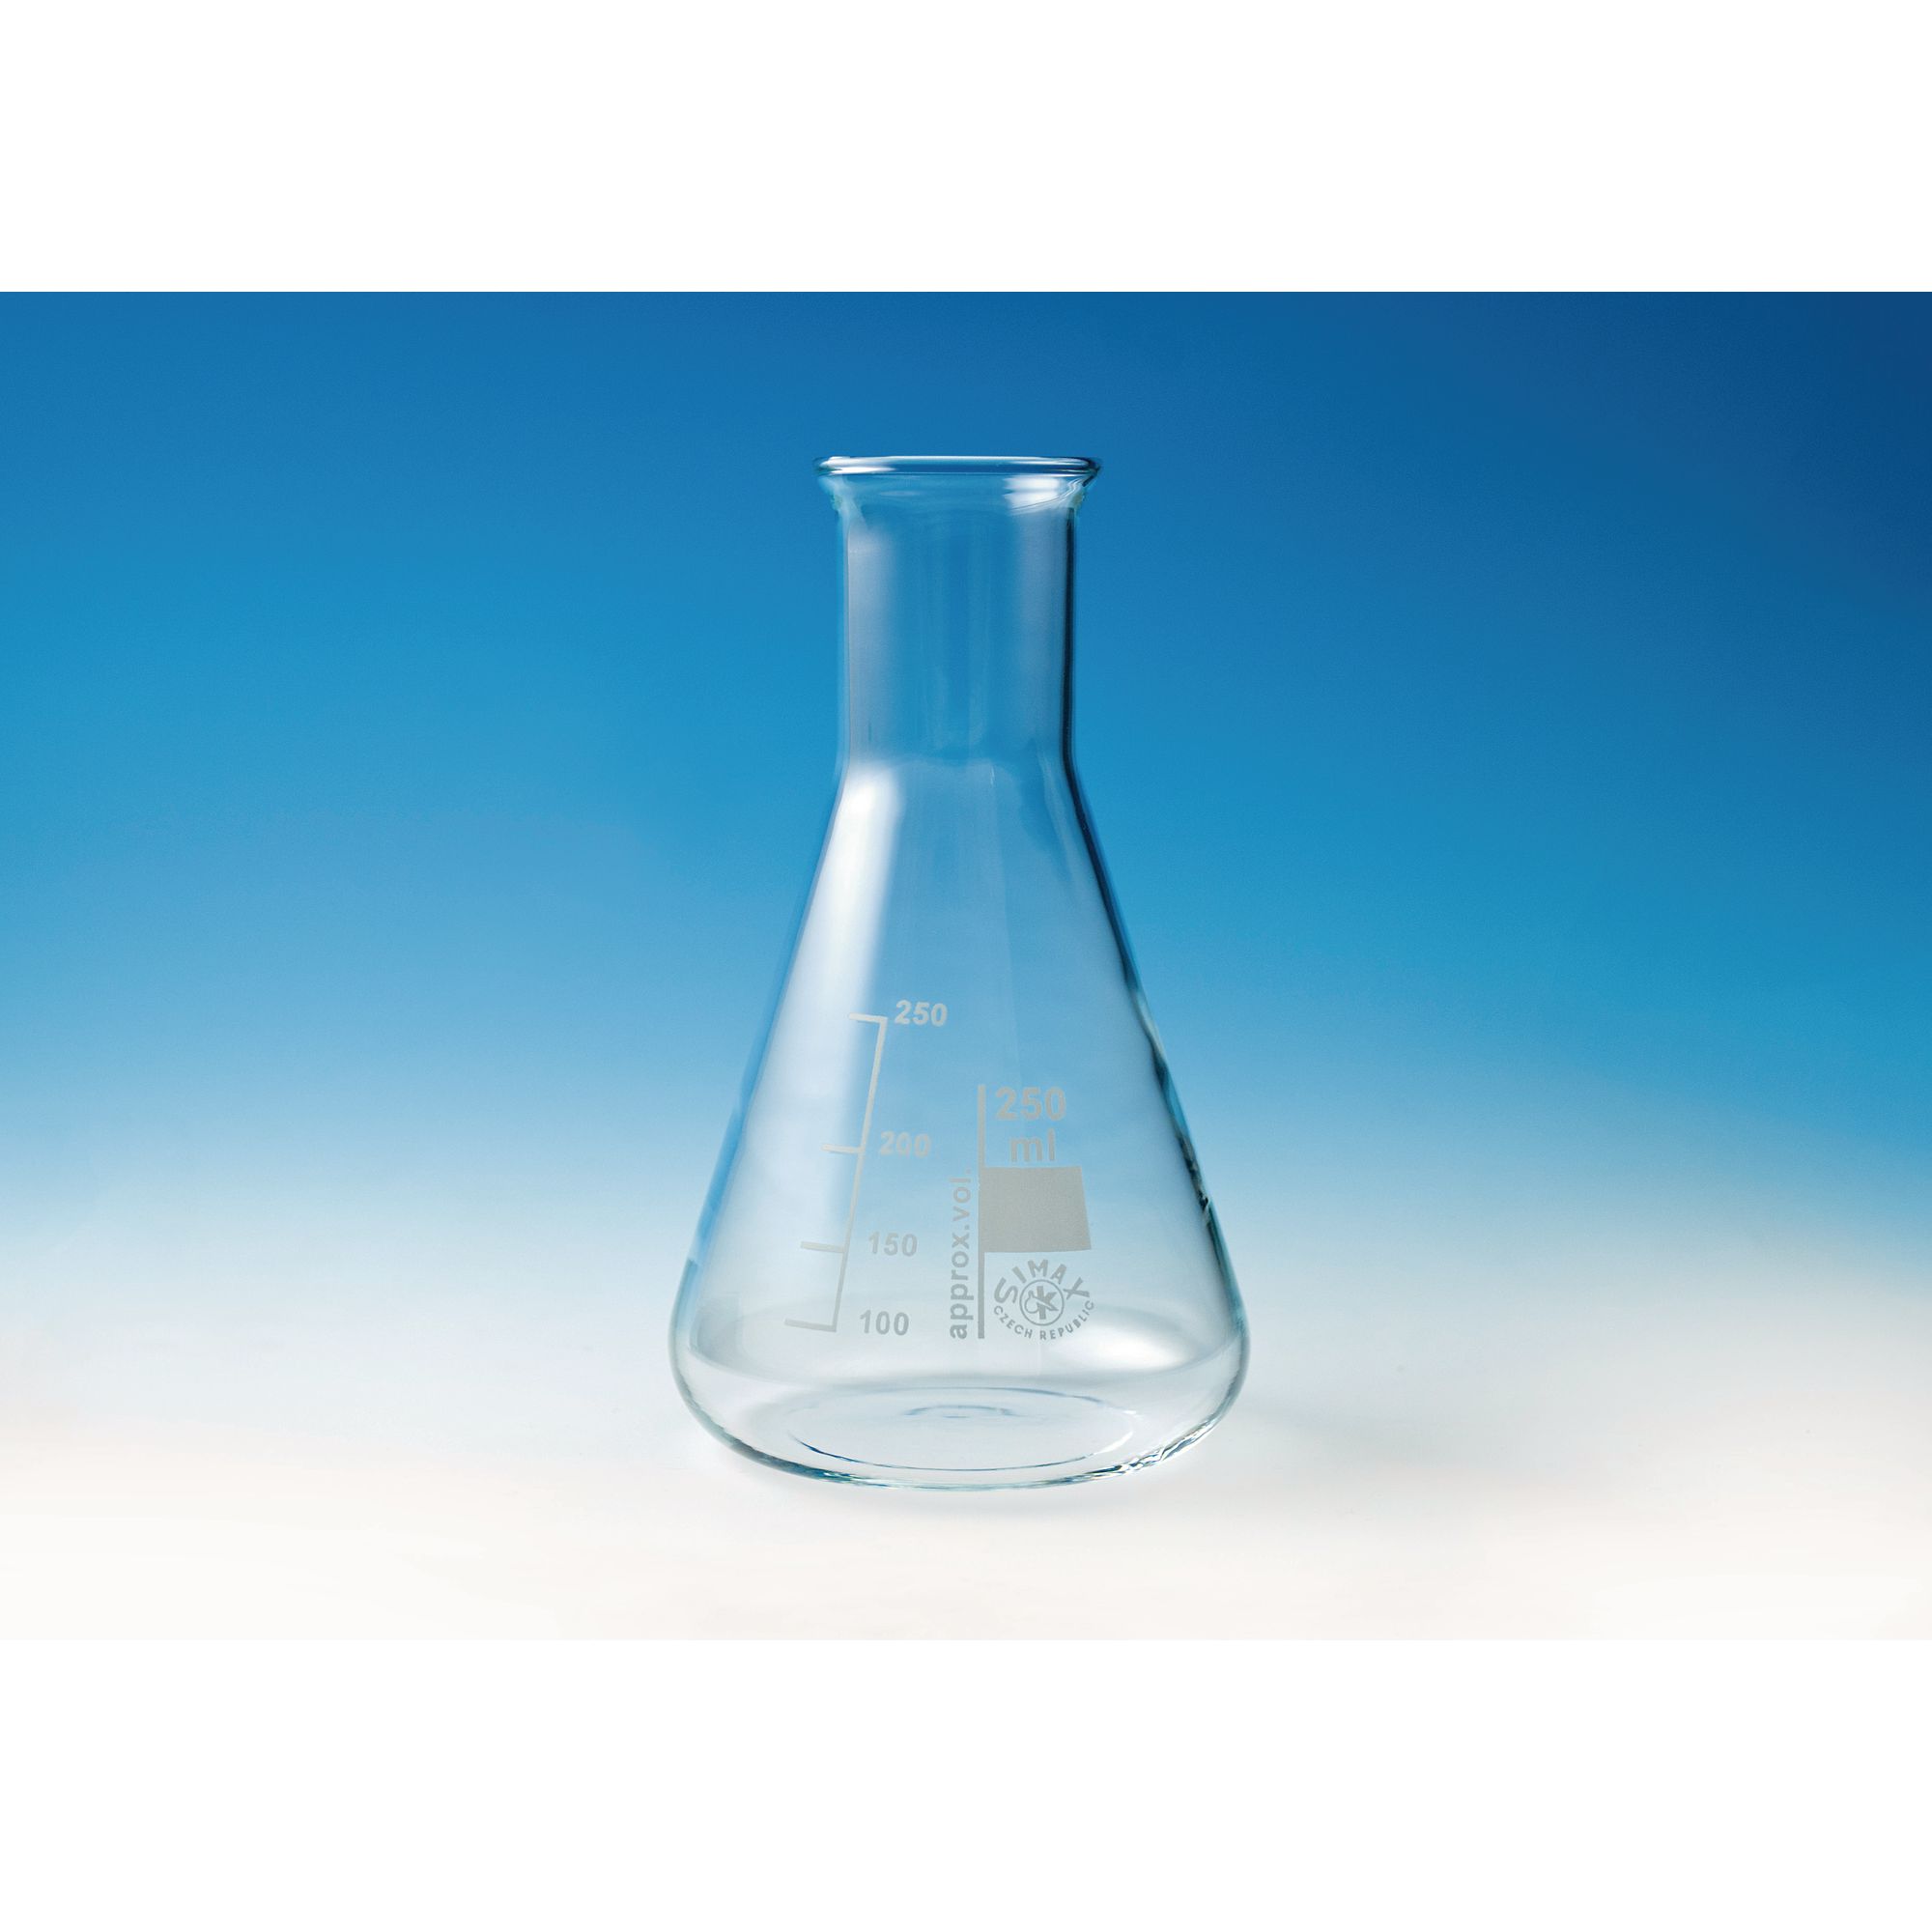 Simax Nmouth Conflask 100mlp10